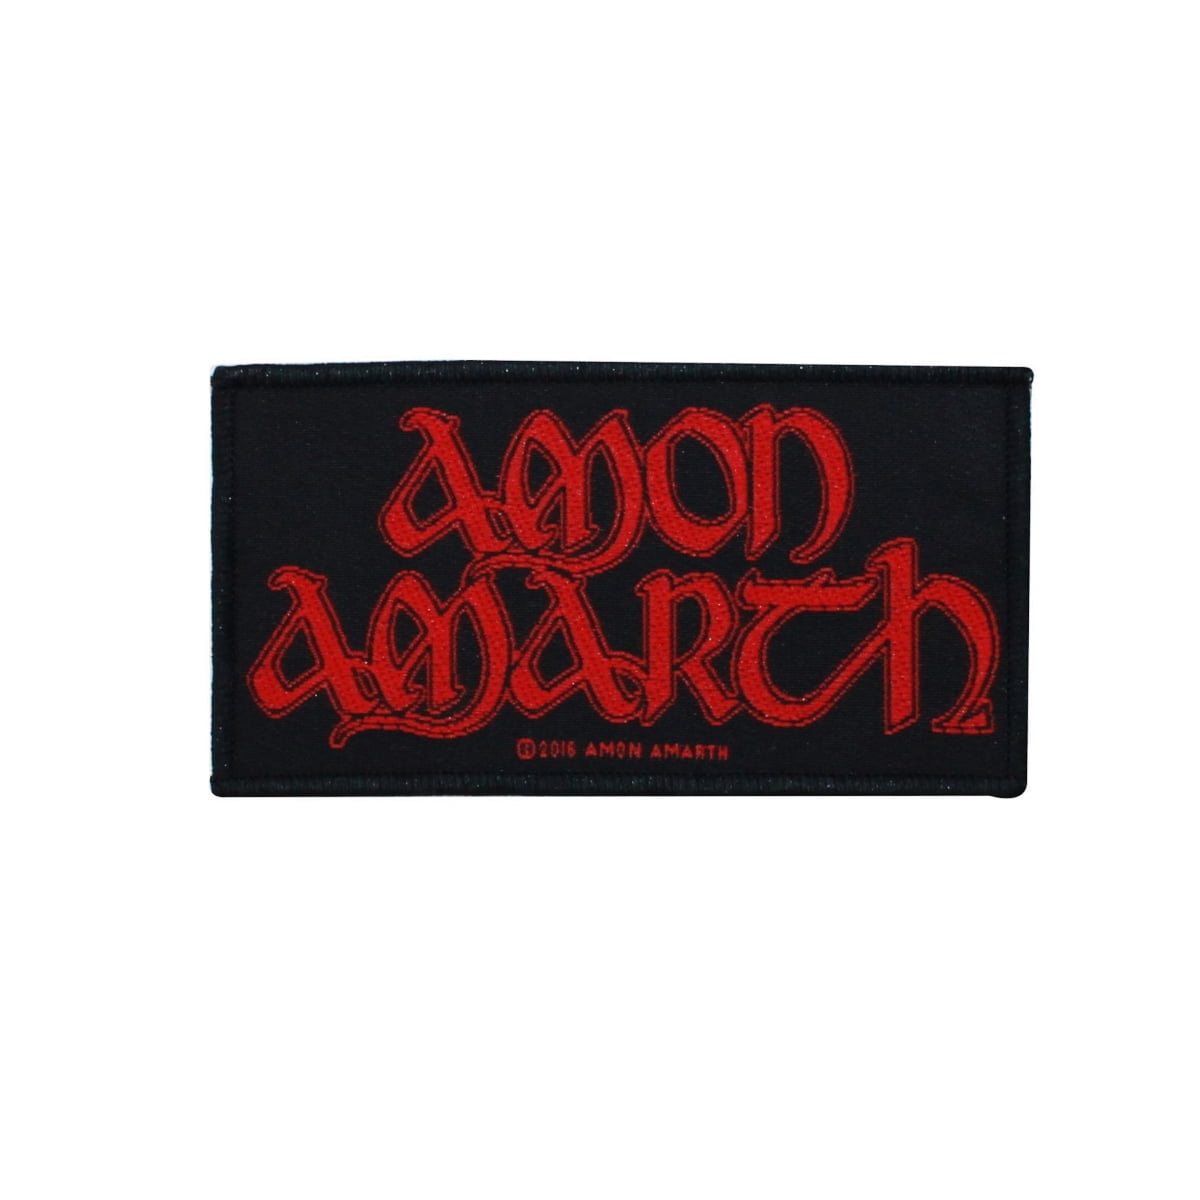 NEW VIKING HORDE AMON AMARTH SEW ON PATCH OFFICIAL BAND MERCH